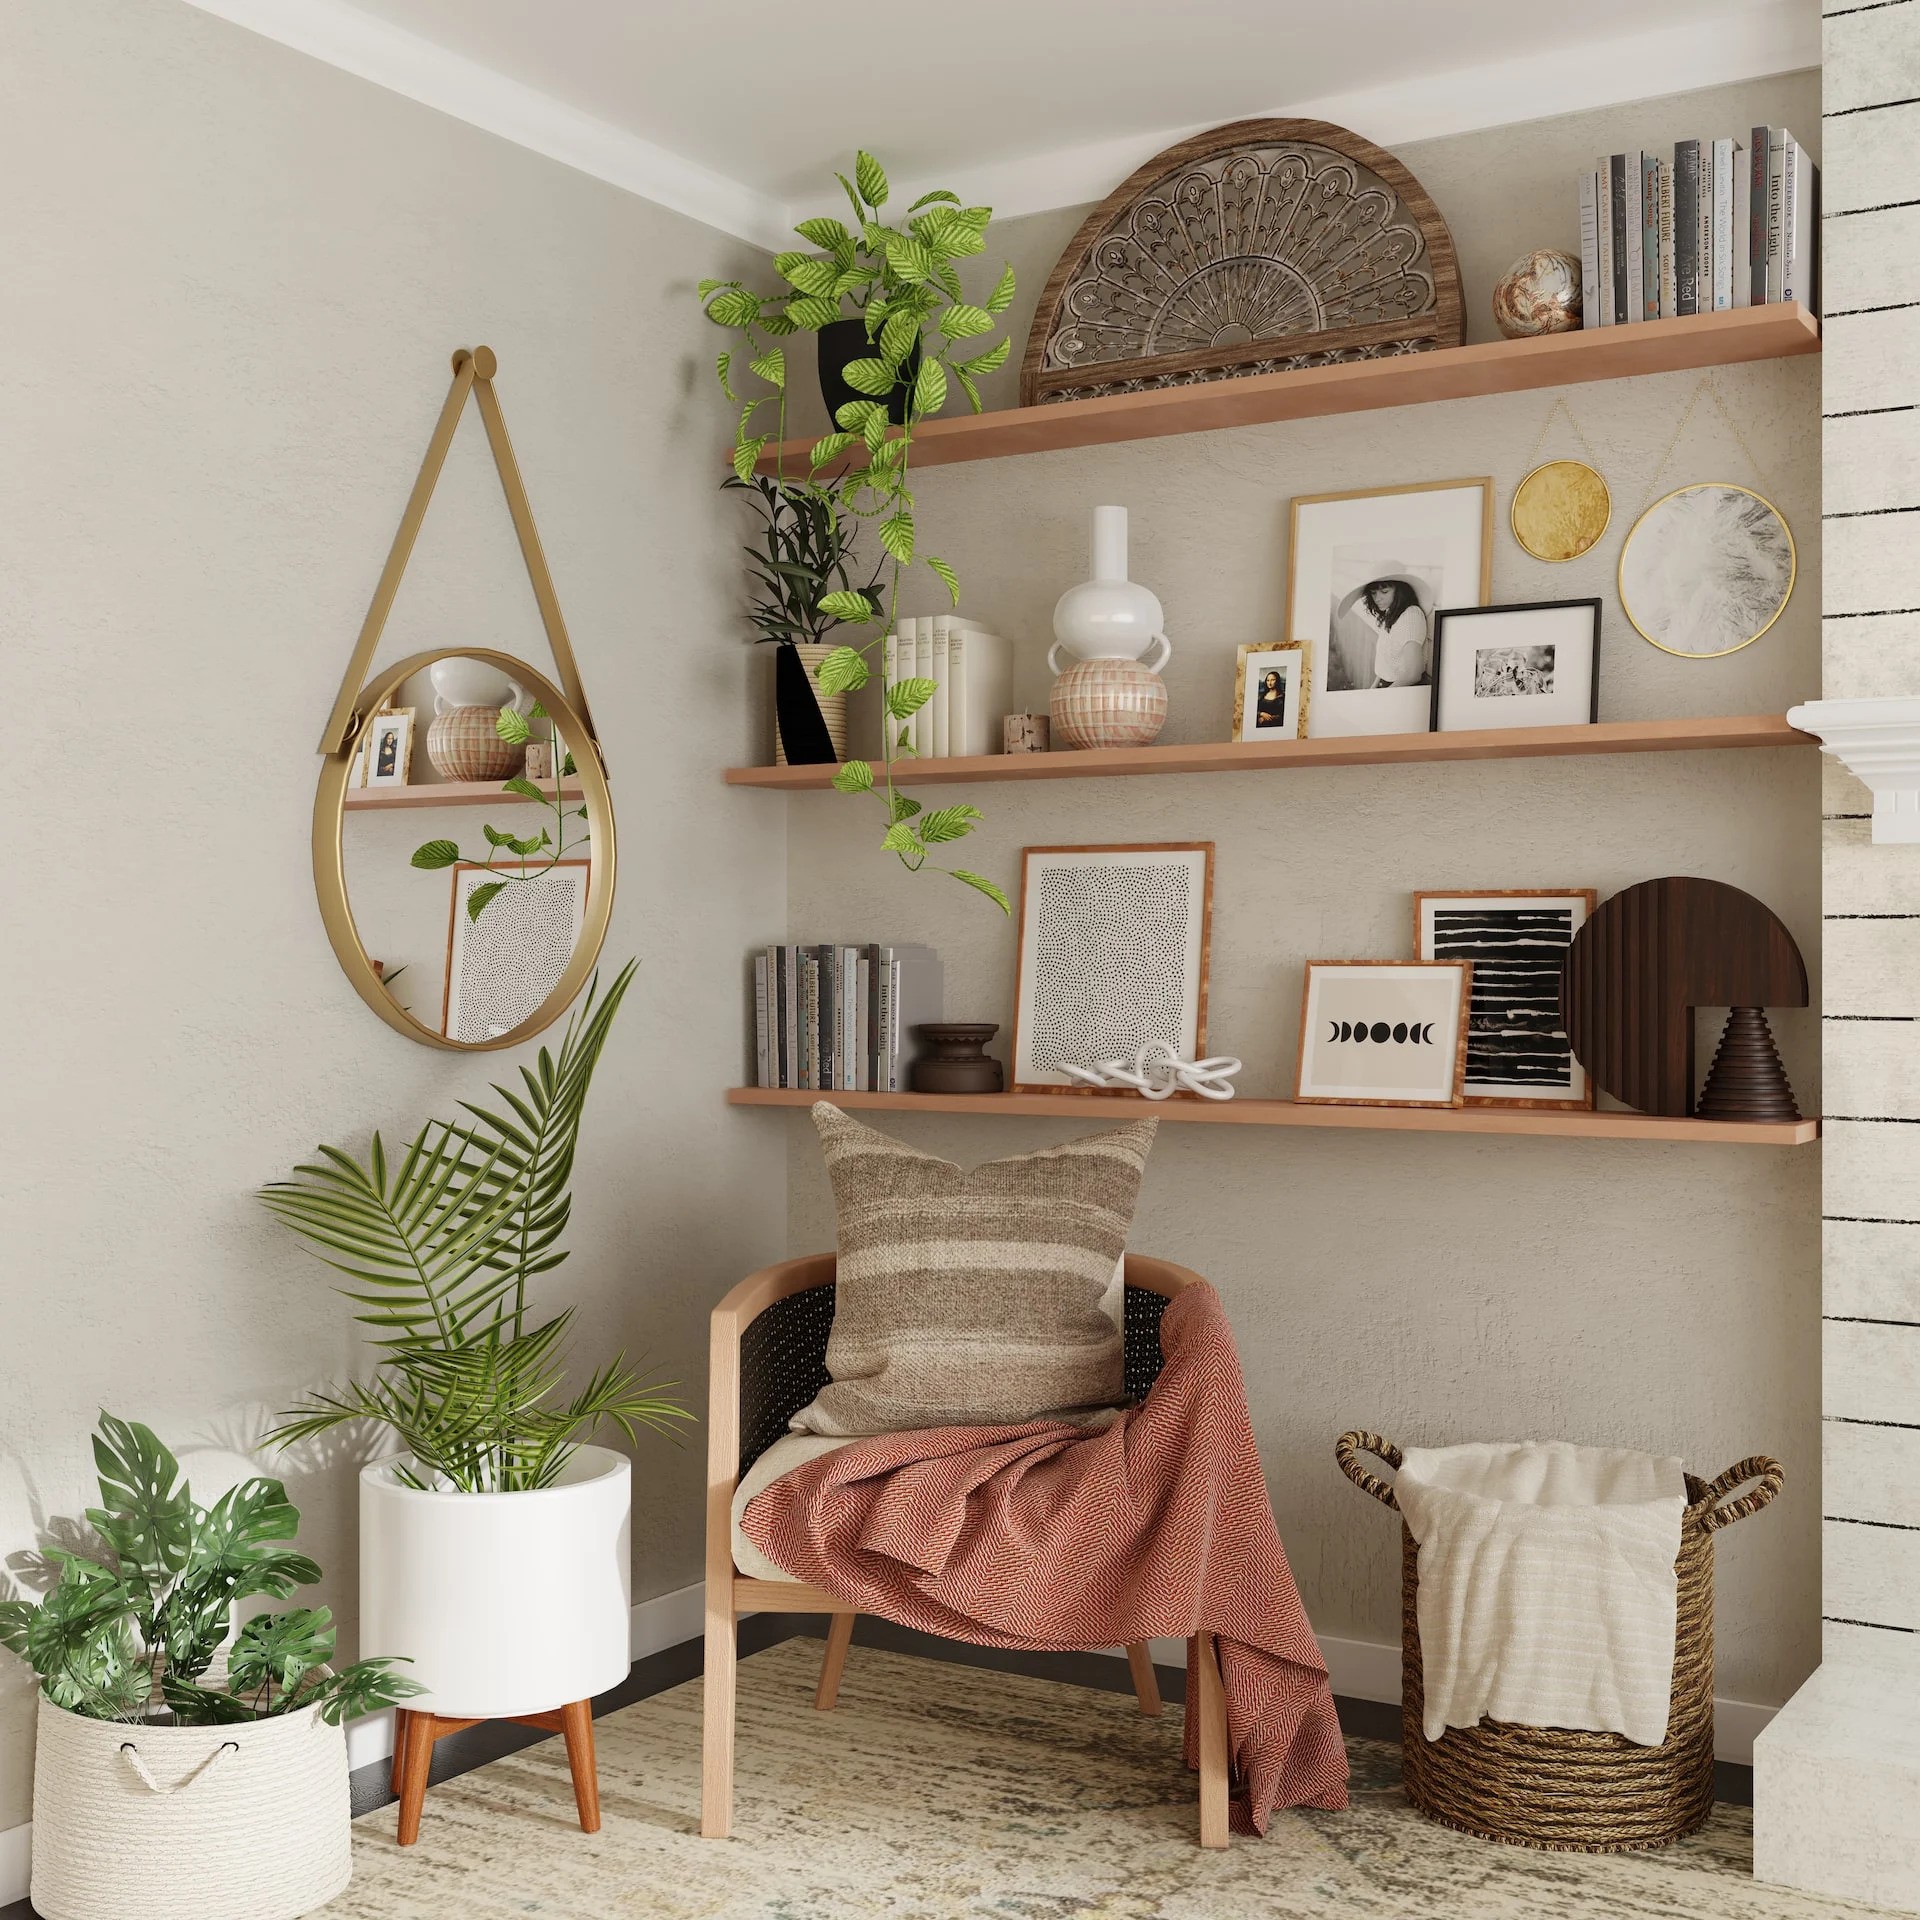 Clever Small Space Decorating Ideas to Maximize Your Area